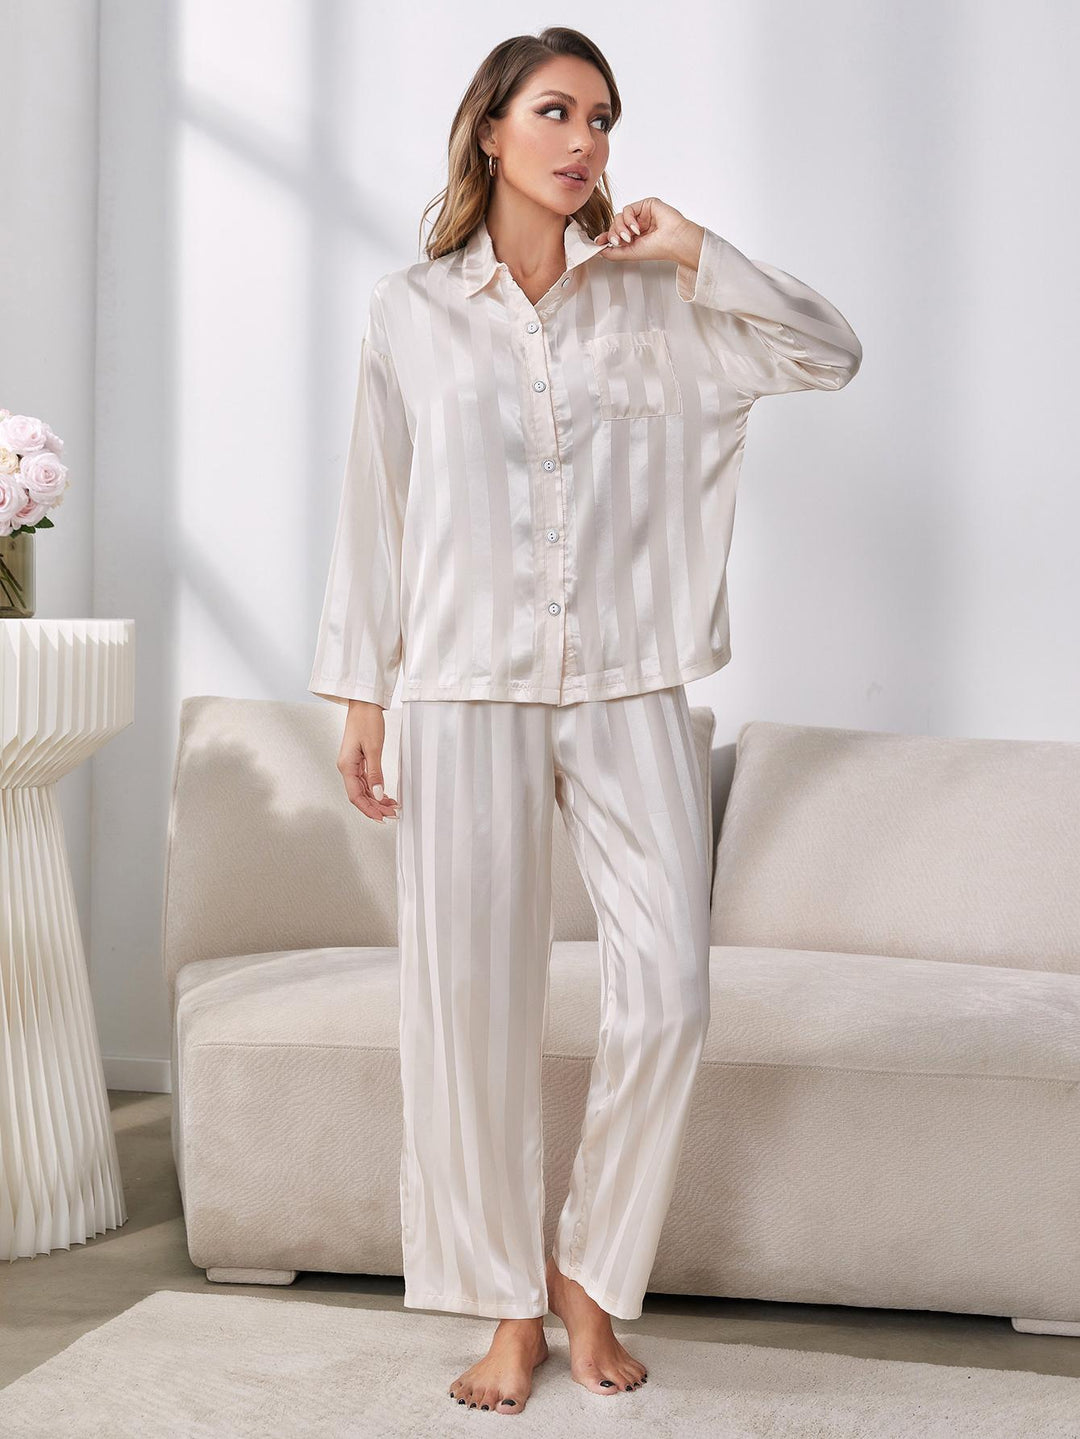 Button-Up Shirt and Pants Pajama Set - pajamas - Wild Willows Boutique - Massapequa, NY, affordable and fashionable clothing for women of all ages. Bottoms, tops, dresses, intimates, outerwear, sweater, shoes, accessories, jewelry, active wear, and more // Wild Willow Boutique.